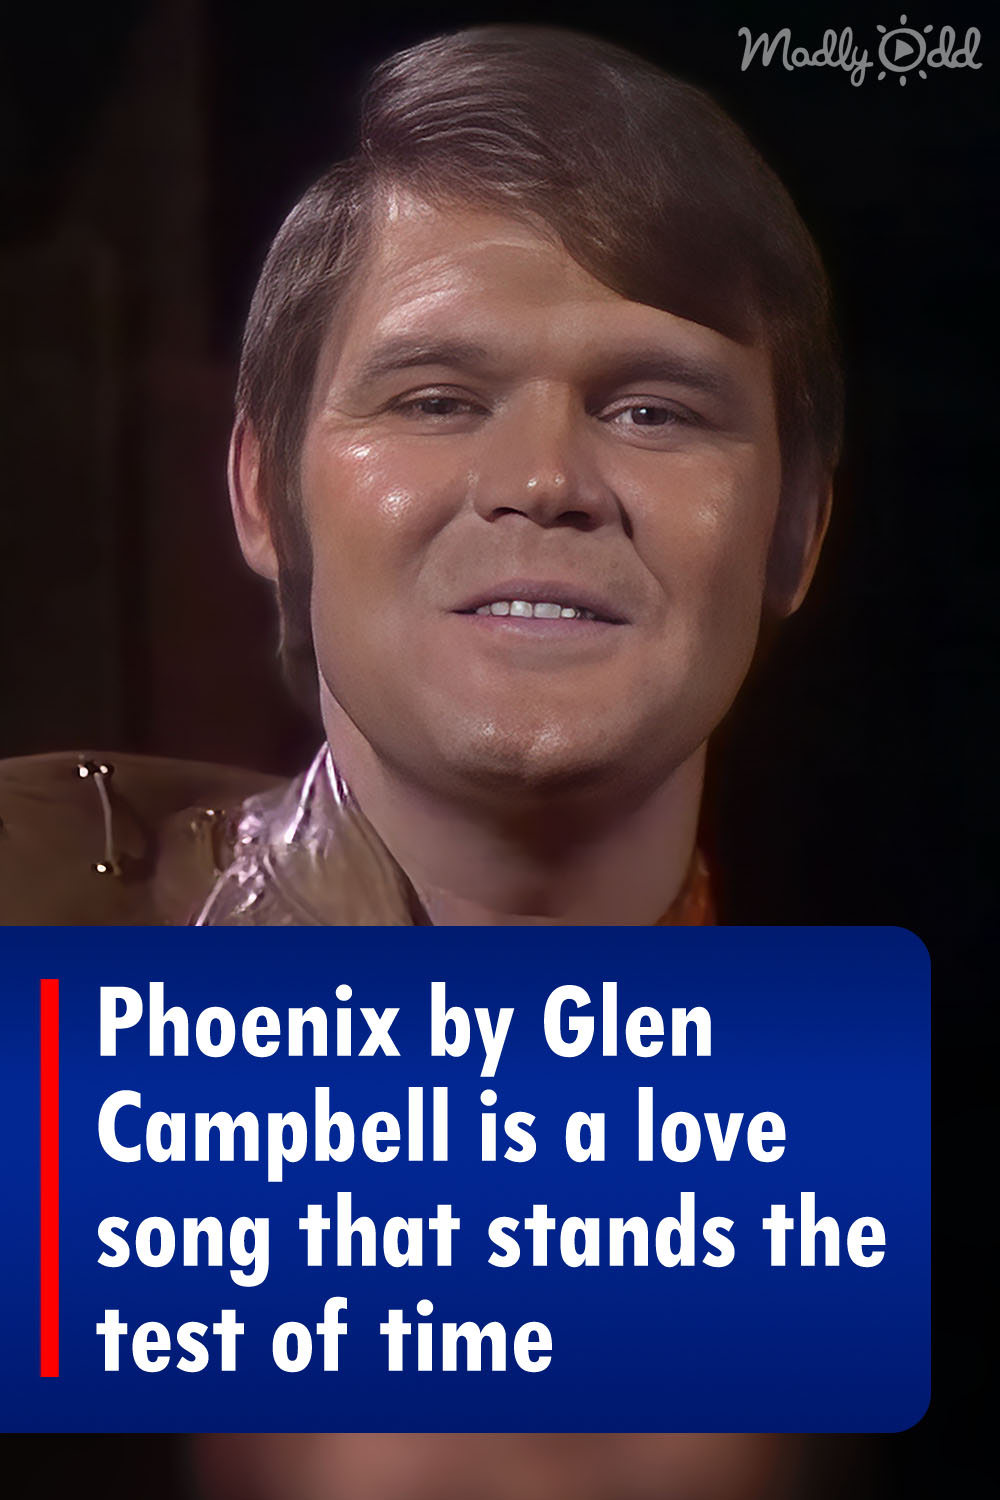 Phoenix by Glen Campbell is a love song that stands the test of time